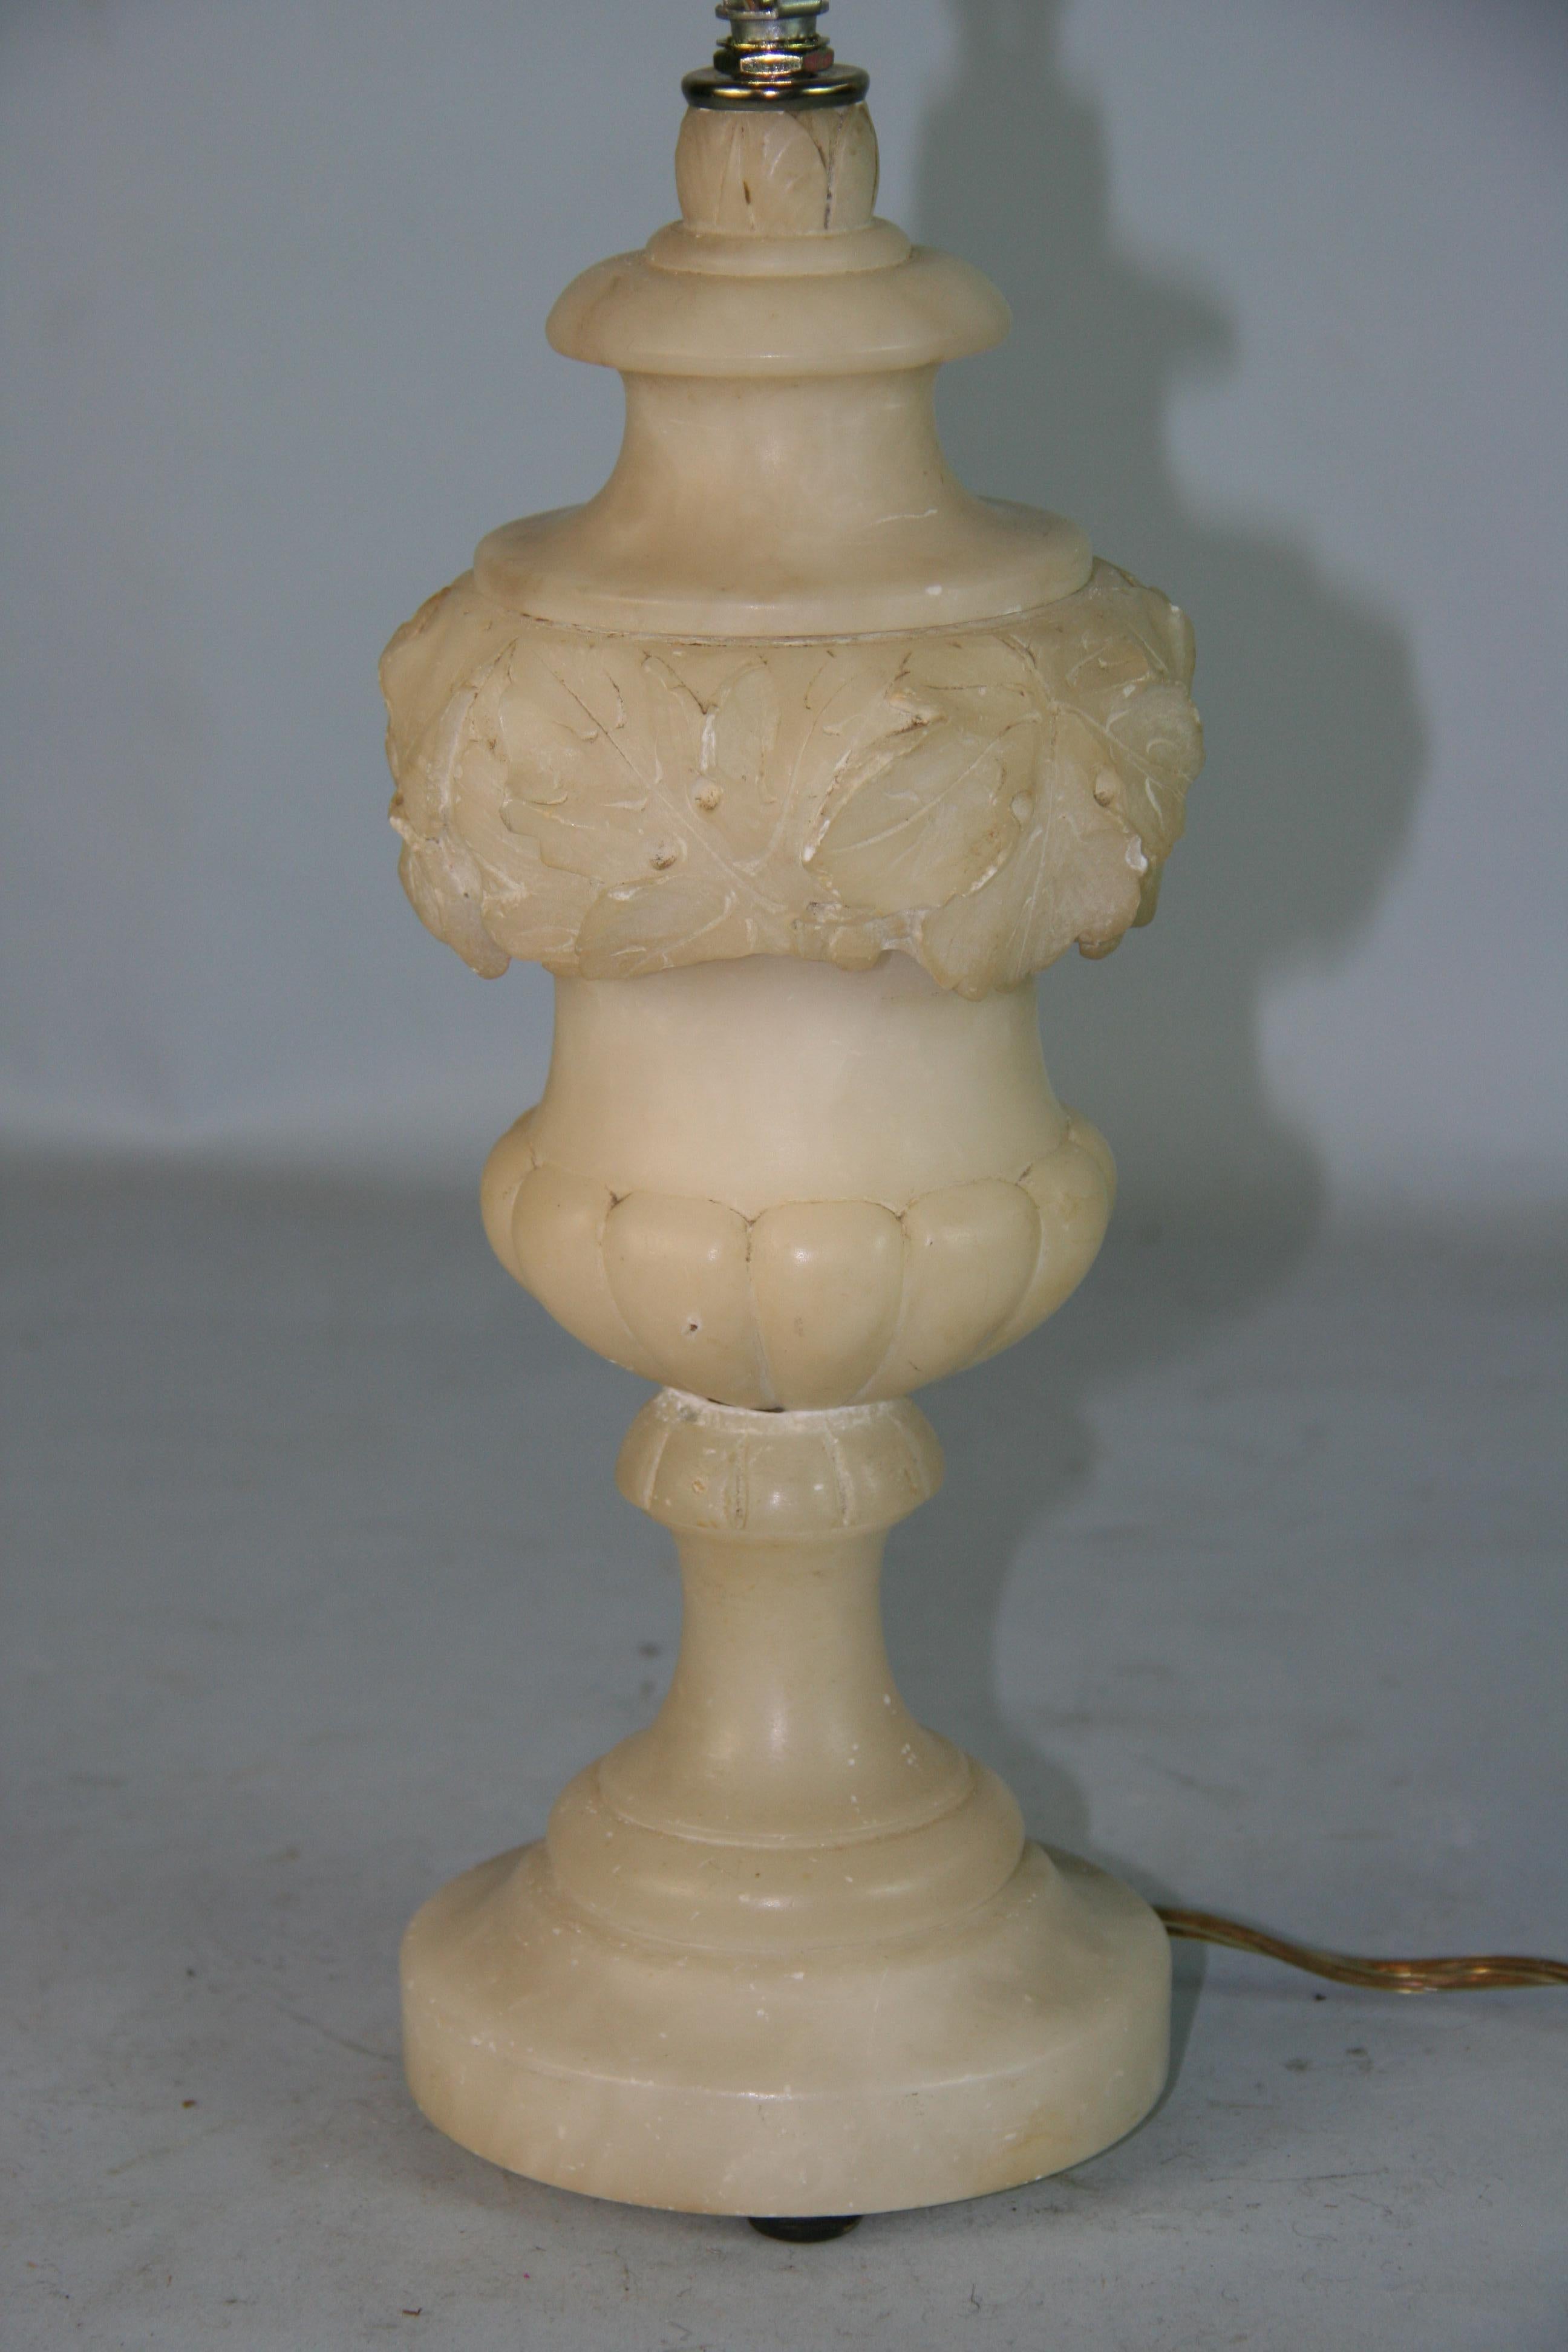 1586 Italian alabaster lamp
Height to top of alabasted 12